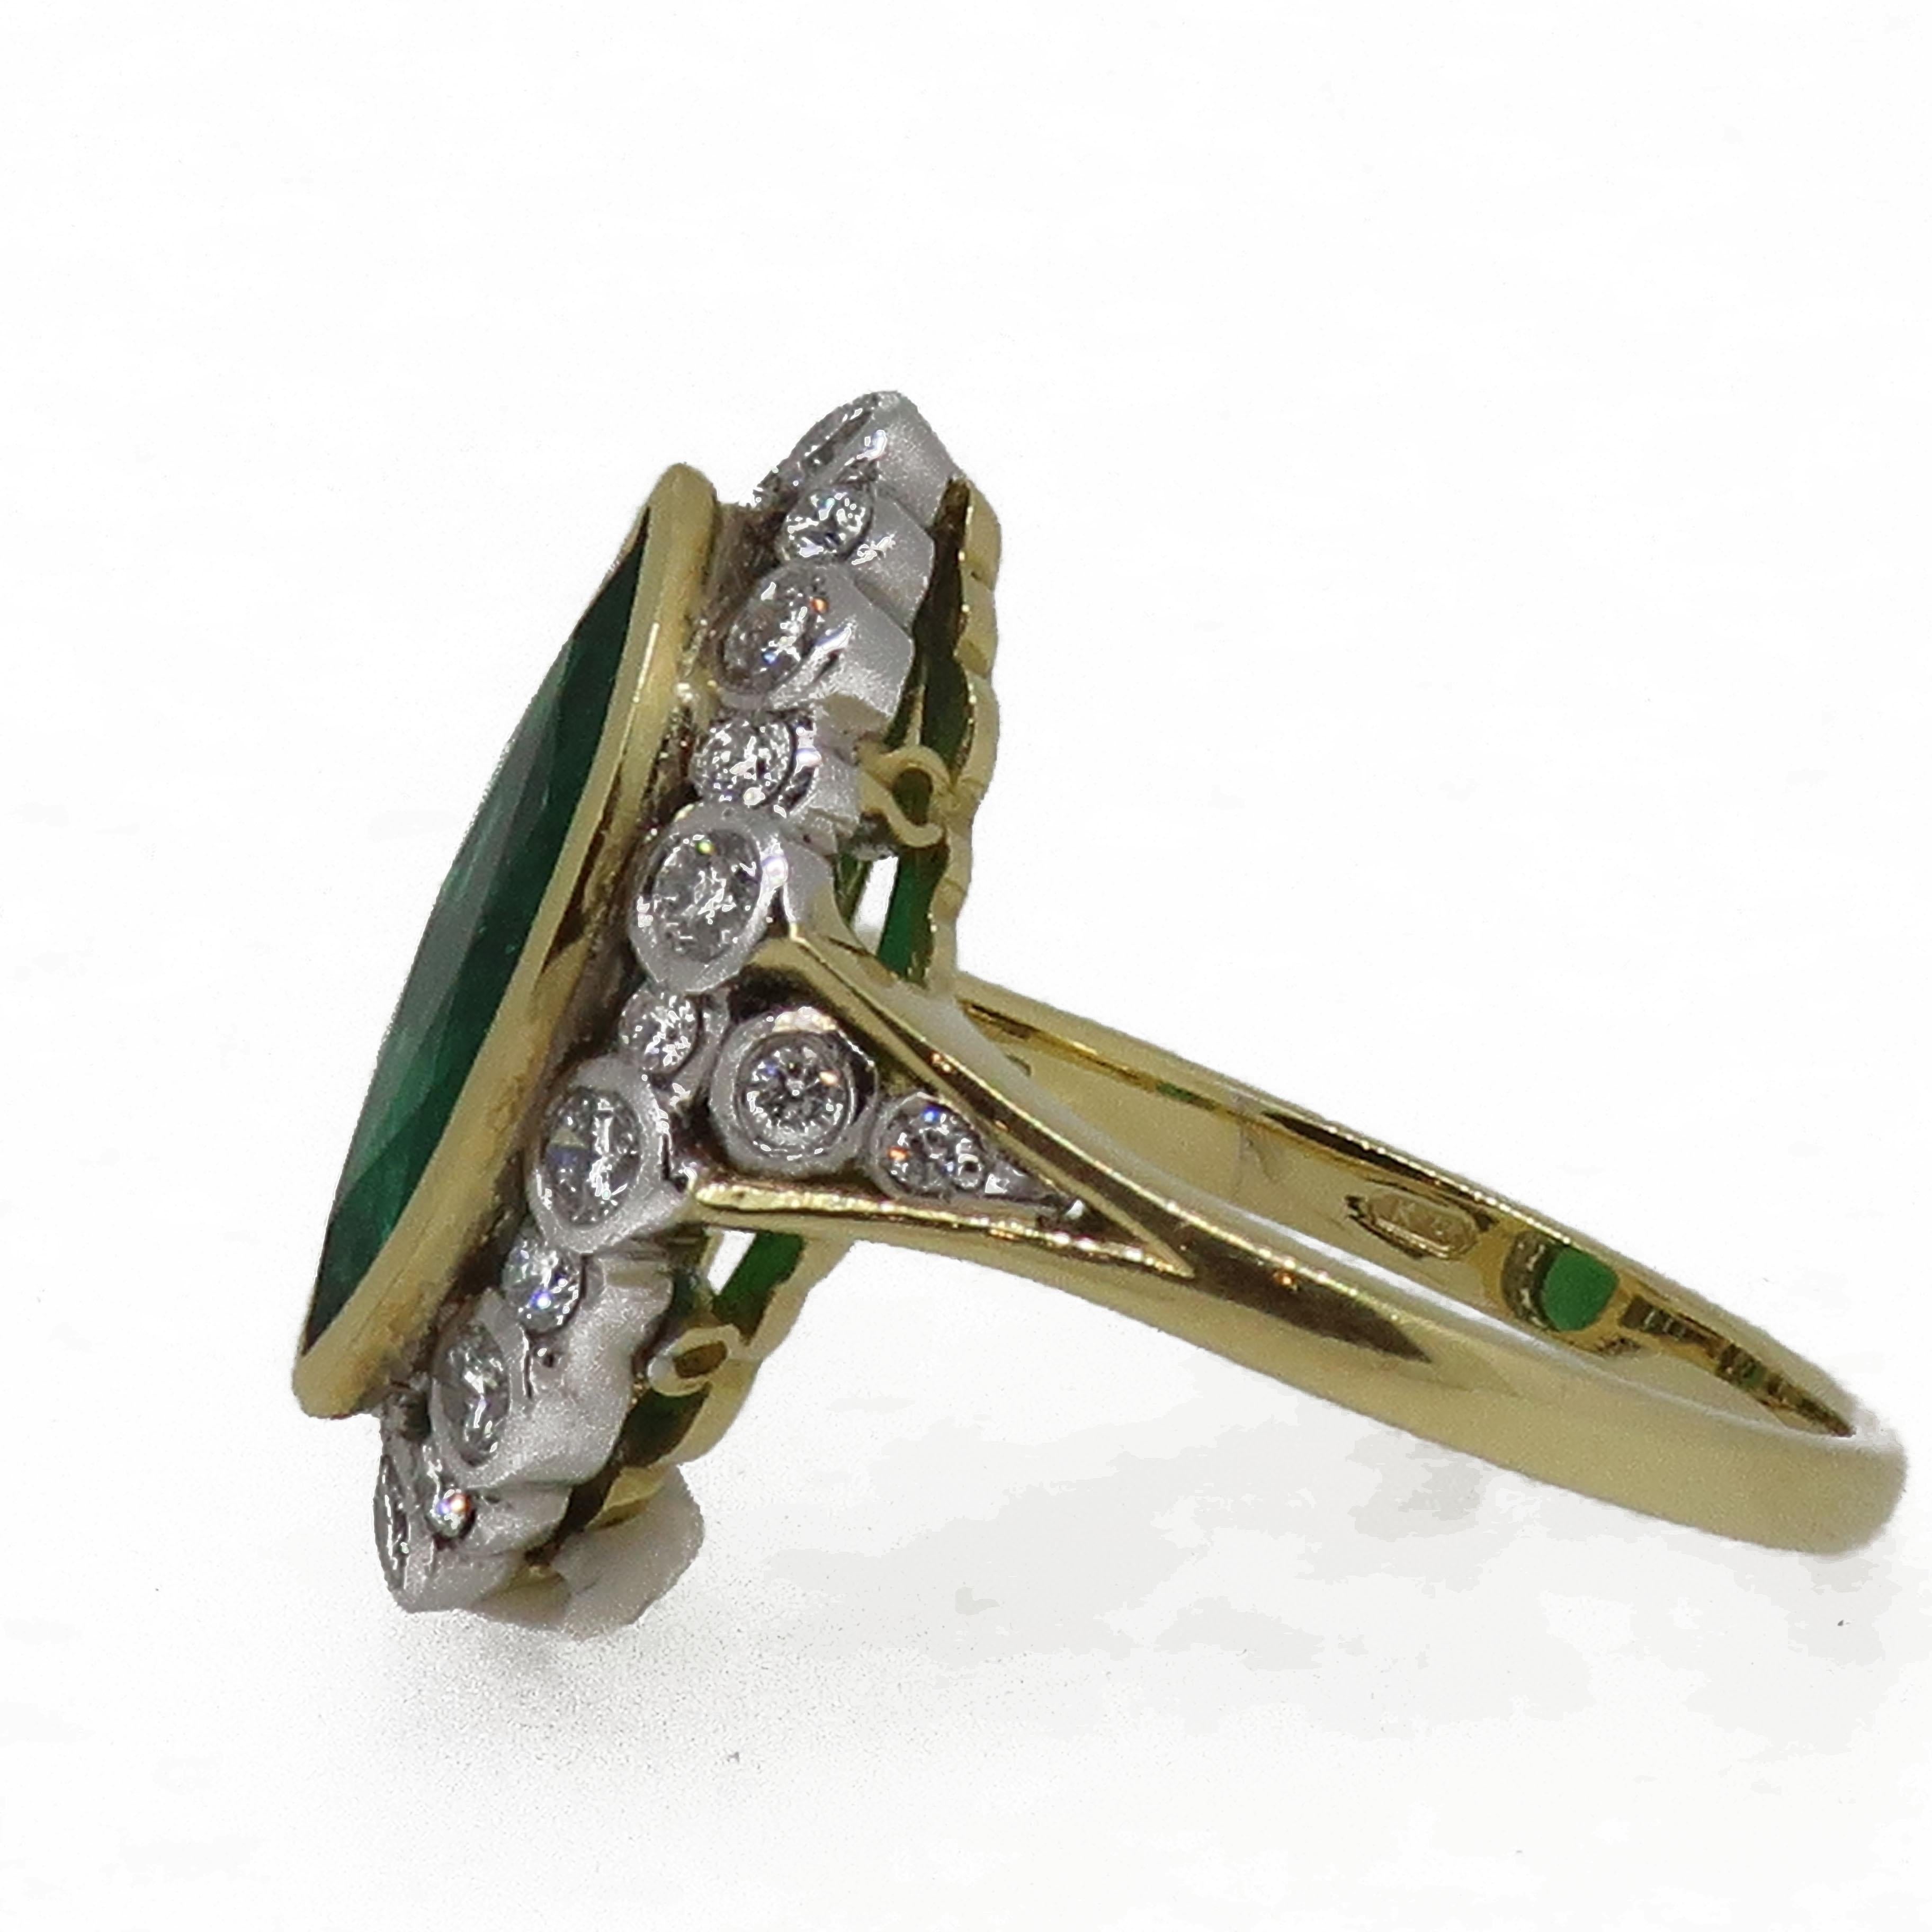 18Carat Gold Marquise Navvette Cut Emerald & Diamond Art Deco Style Cluster Ring.

A truly mesmerising marquise cut green Columbian emerald set in a fine yellow gold bezel weighing 2.25ct, surrounded by white brilliant cut diamonds all set